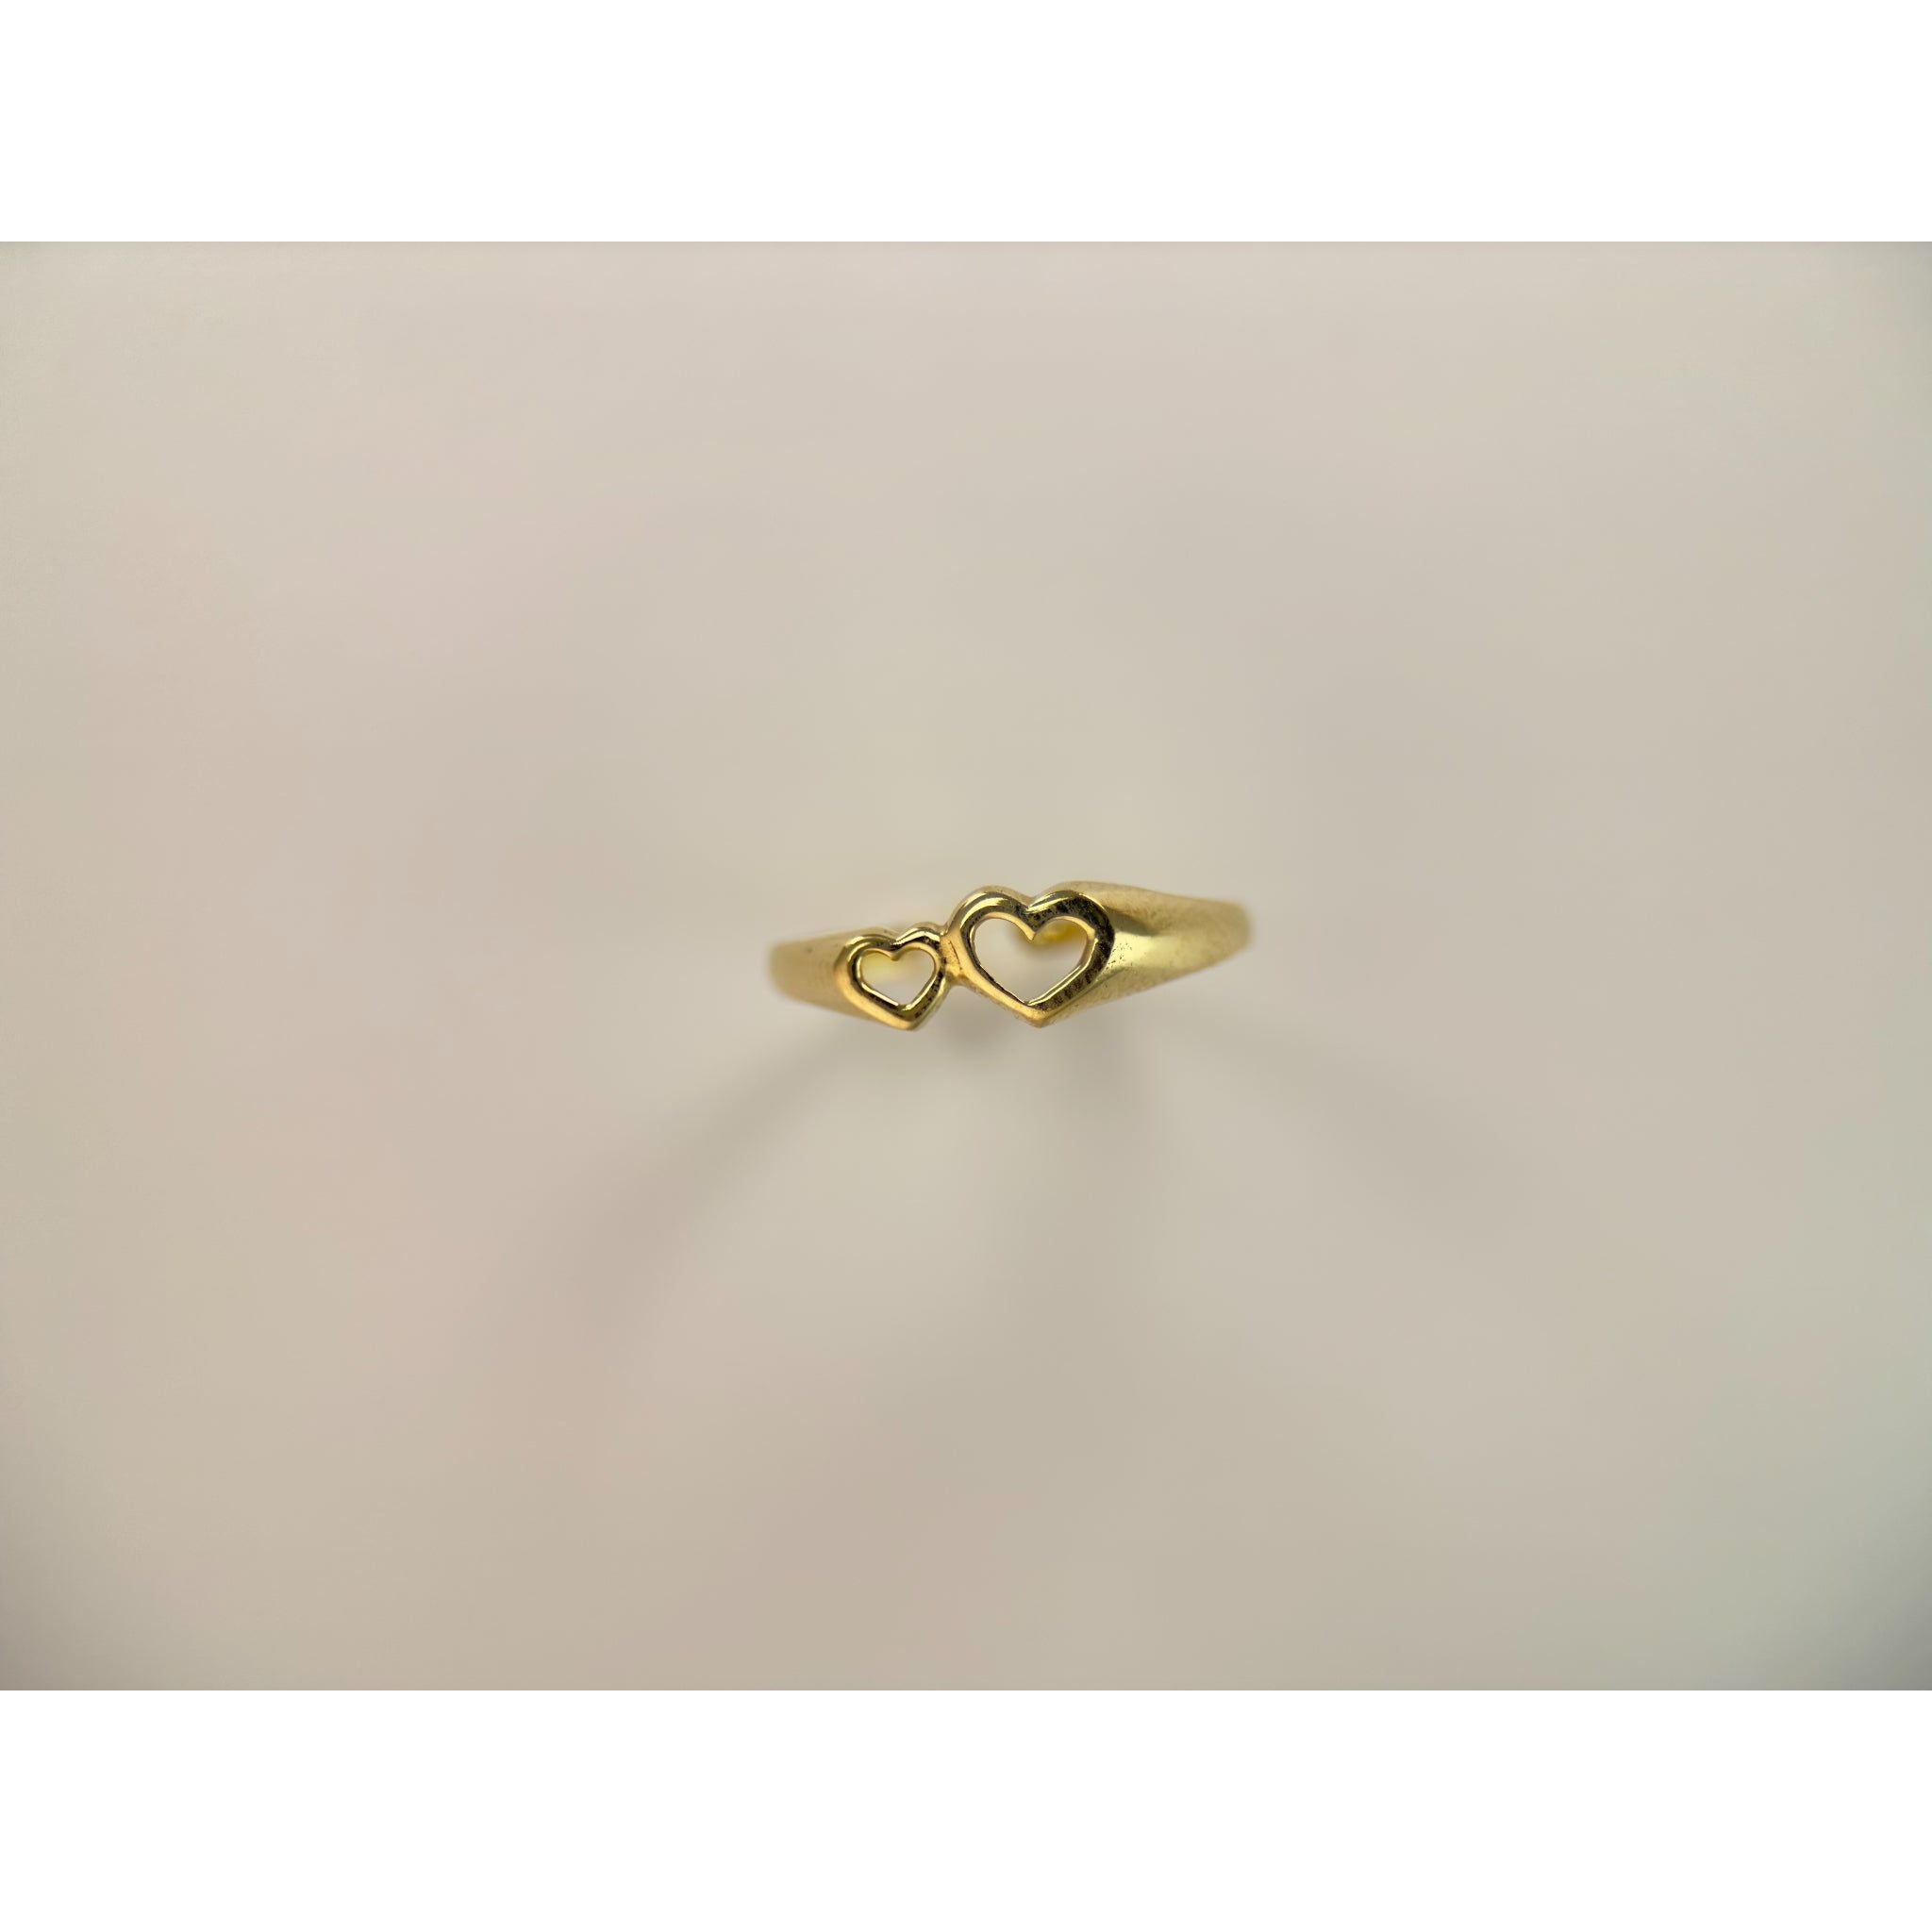 DR2004 - 14K Yellow Gold - Ladies Gold Rings - 2 hearts